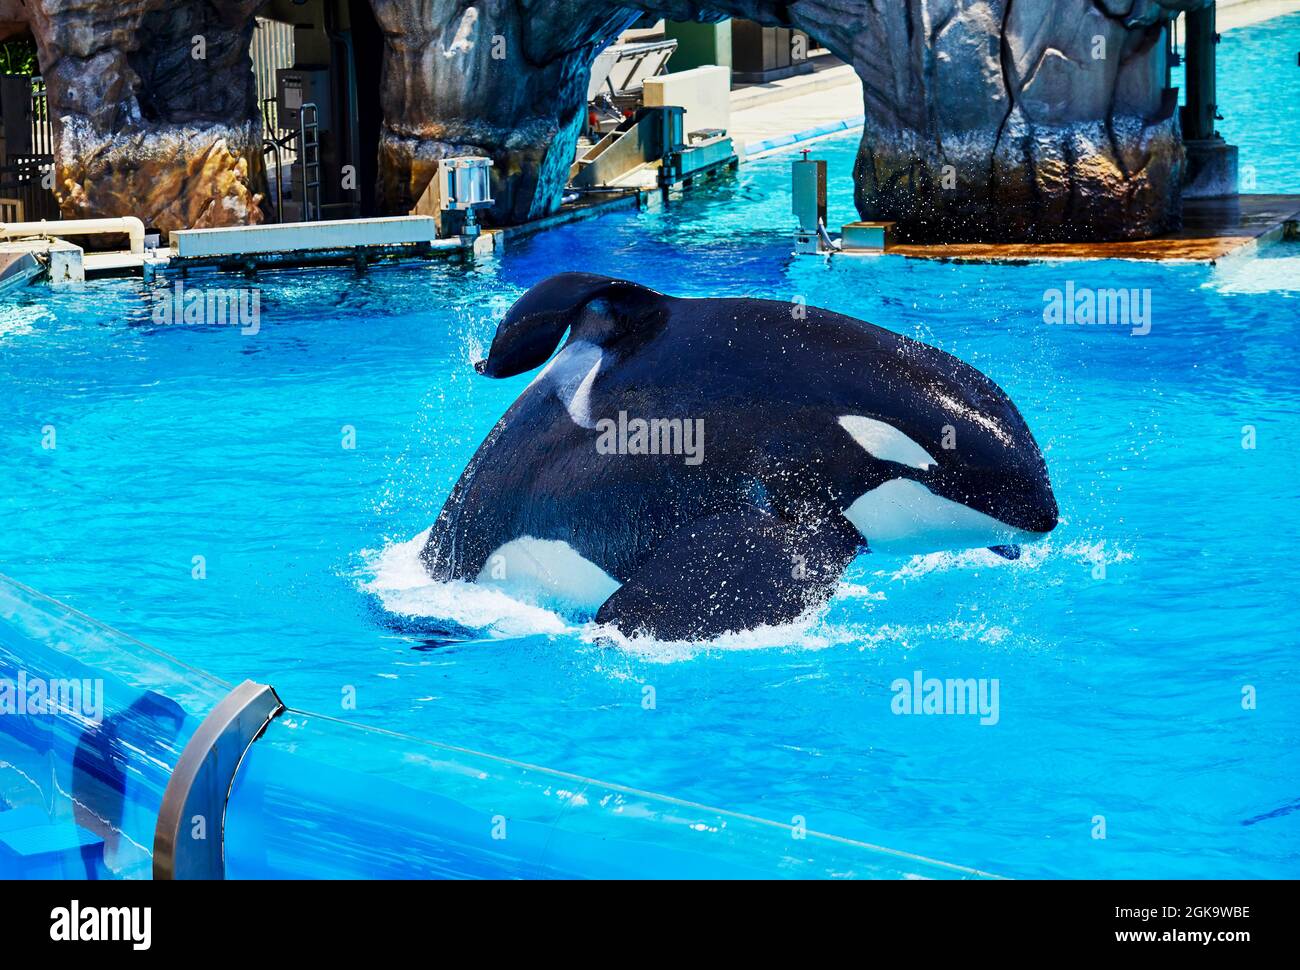 San Diego, California, USA - July 16, 2021: Orca in captivity jumping out of the water at Sea World with instruction from trainer Stock Photo